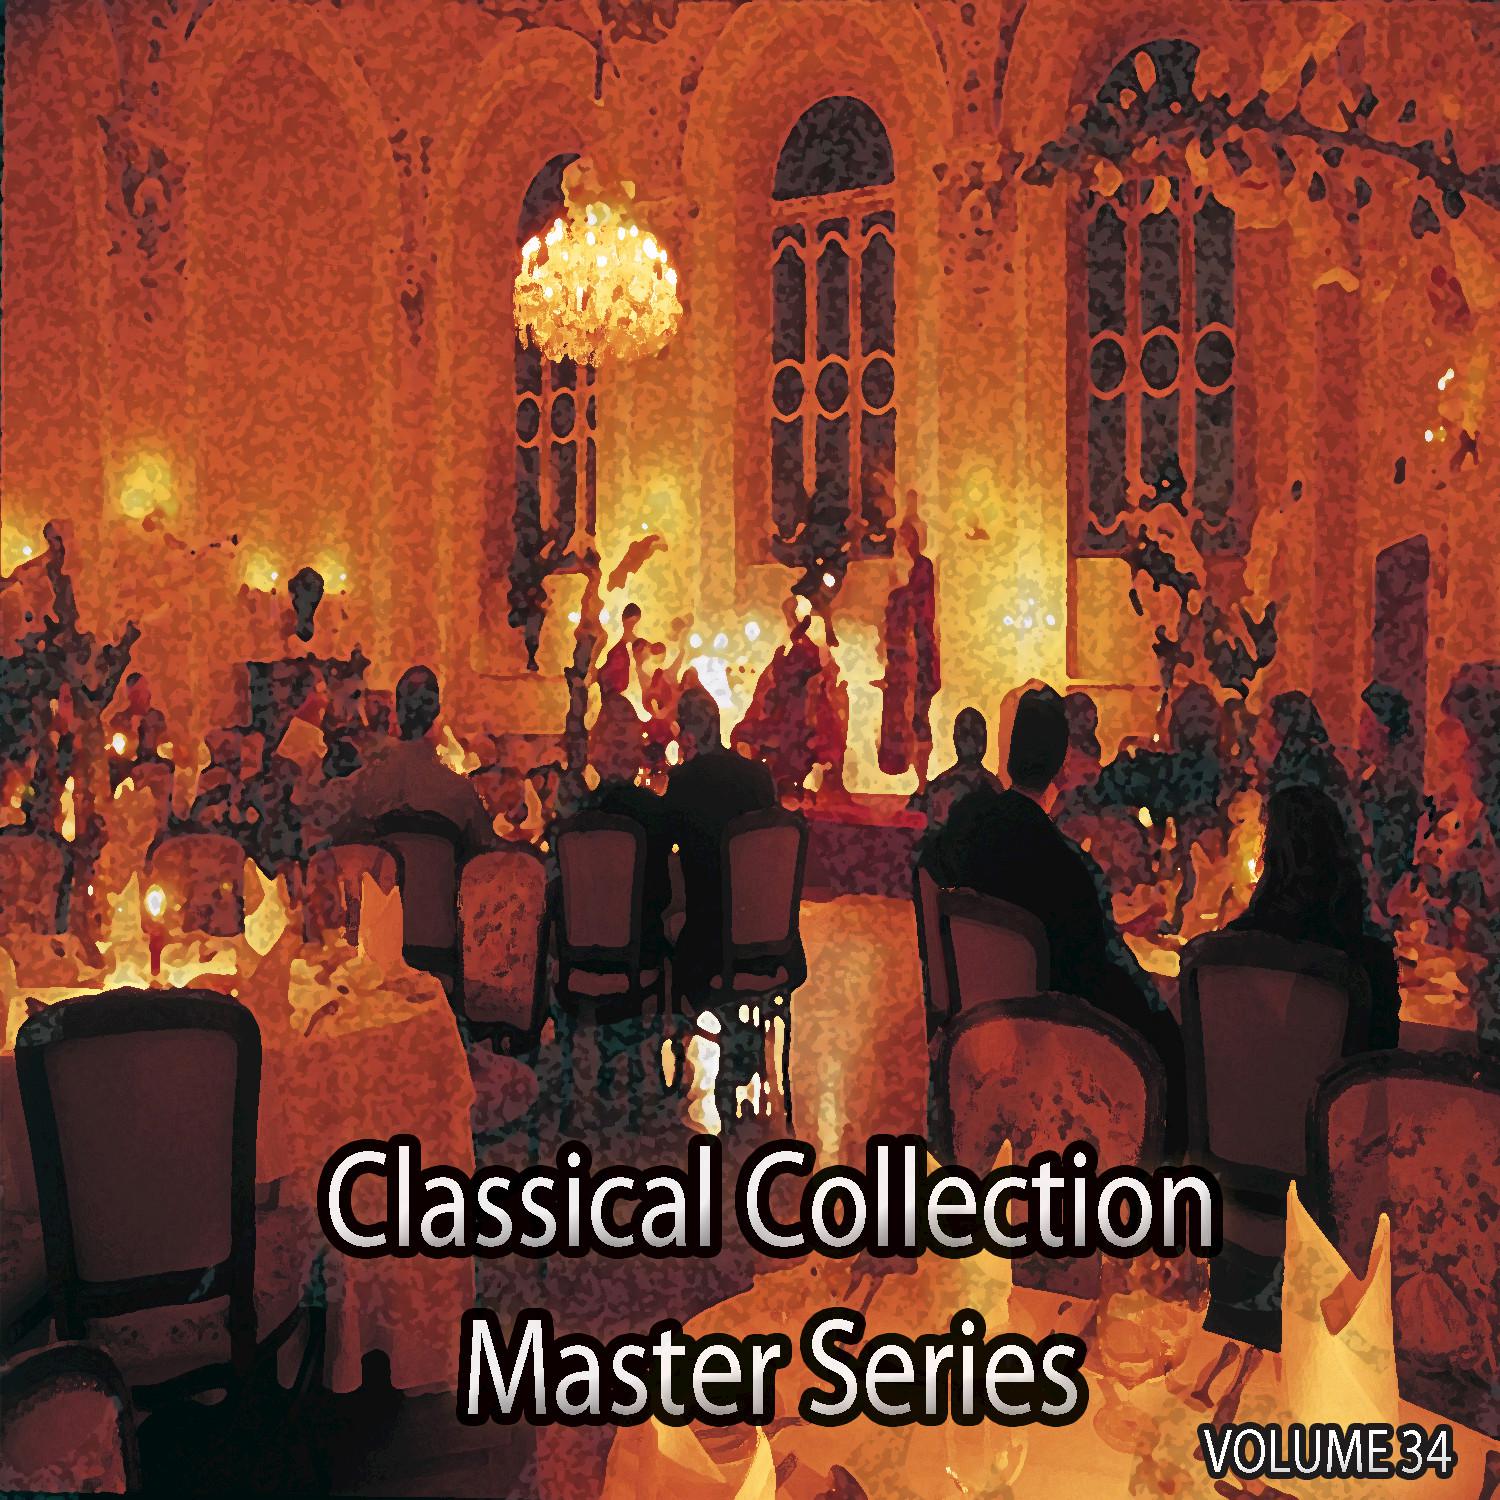 Concerto for Violin and Orchestra No. 2 in G Minor, Op. 63: II. Andante assai, Pt. 1